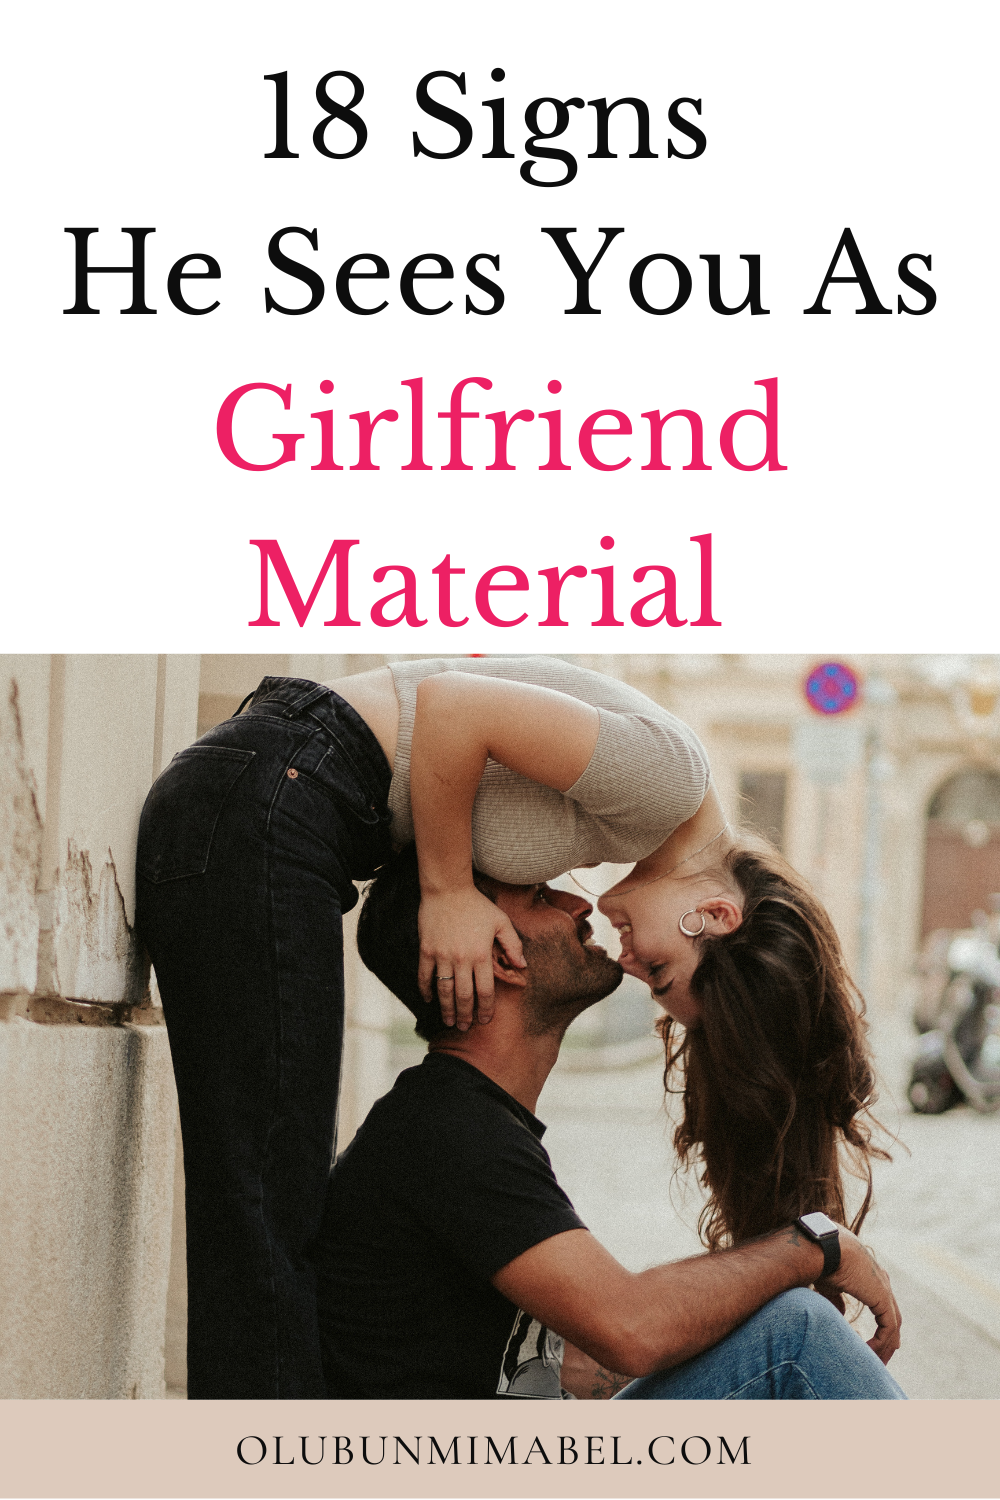 Signs He Sees You As Girlfriend Material